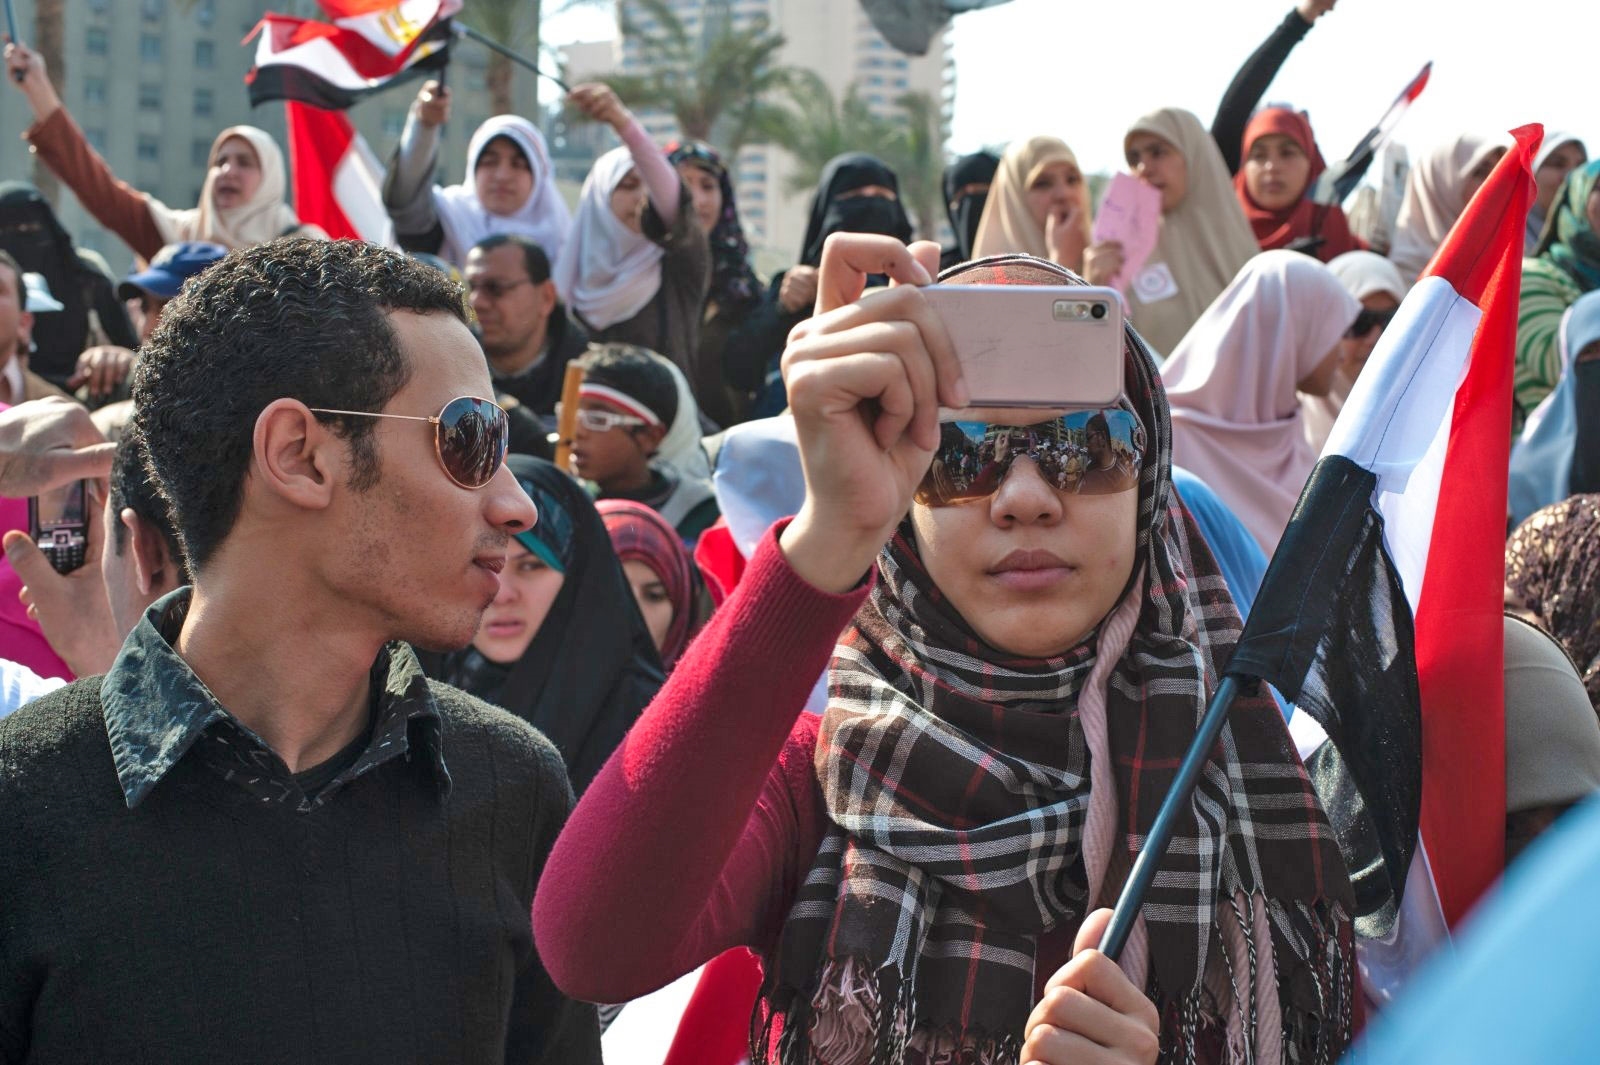 Egypt will subject popular social accounts to anti-fake news laws | DeviceDaily.com